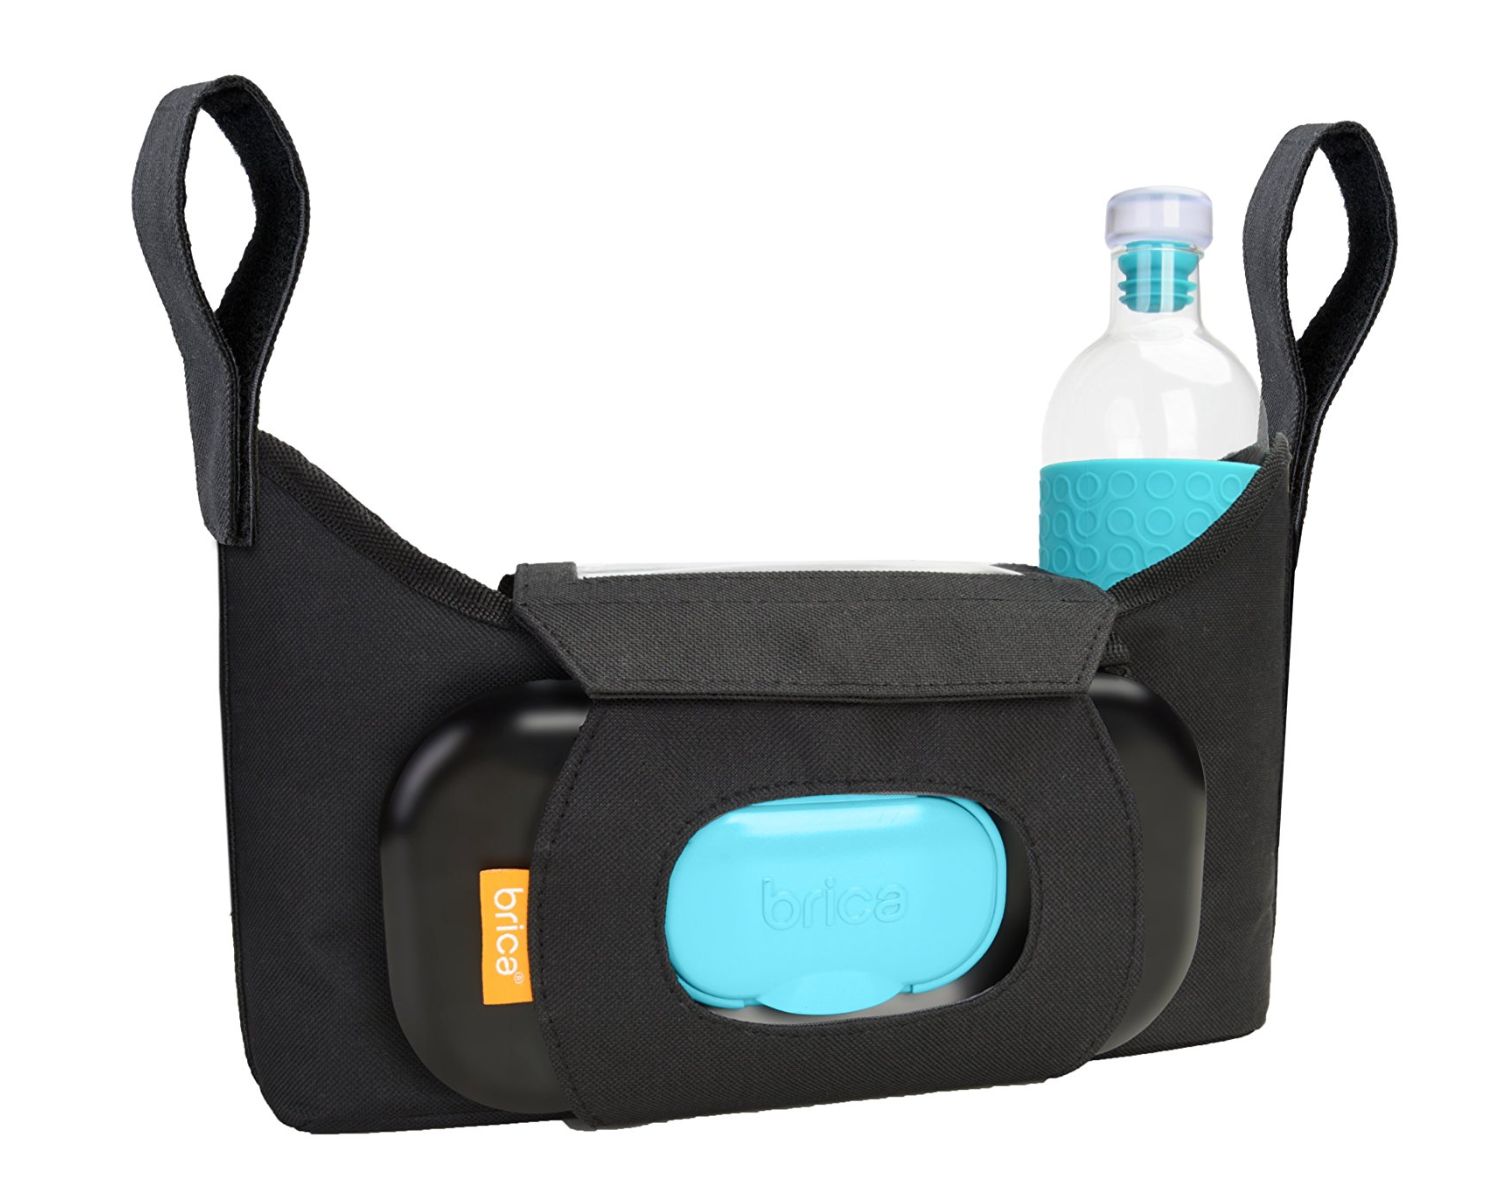 Stroller Organizer Review: The Perfect Accessory for On-the-Go Parents